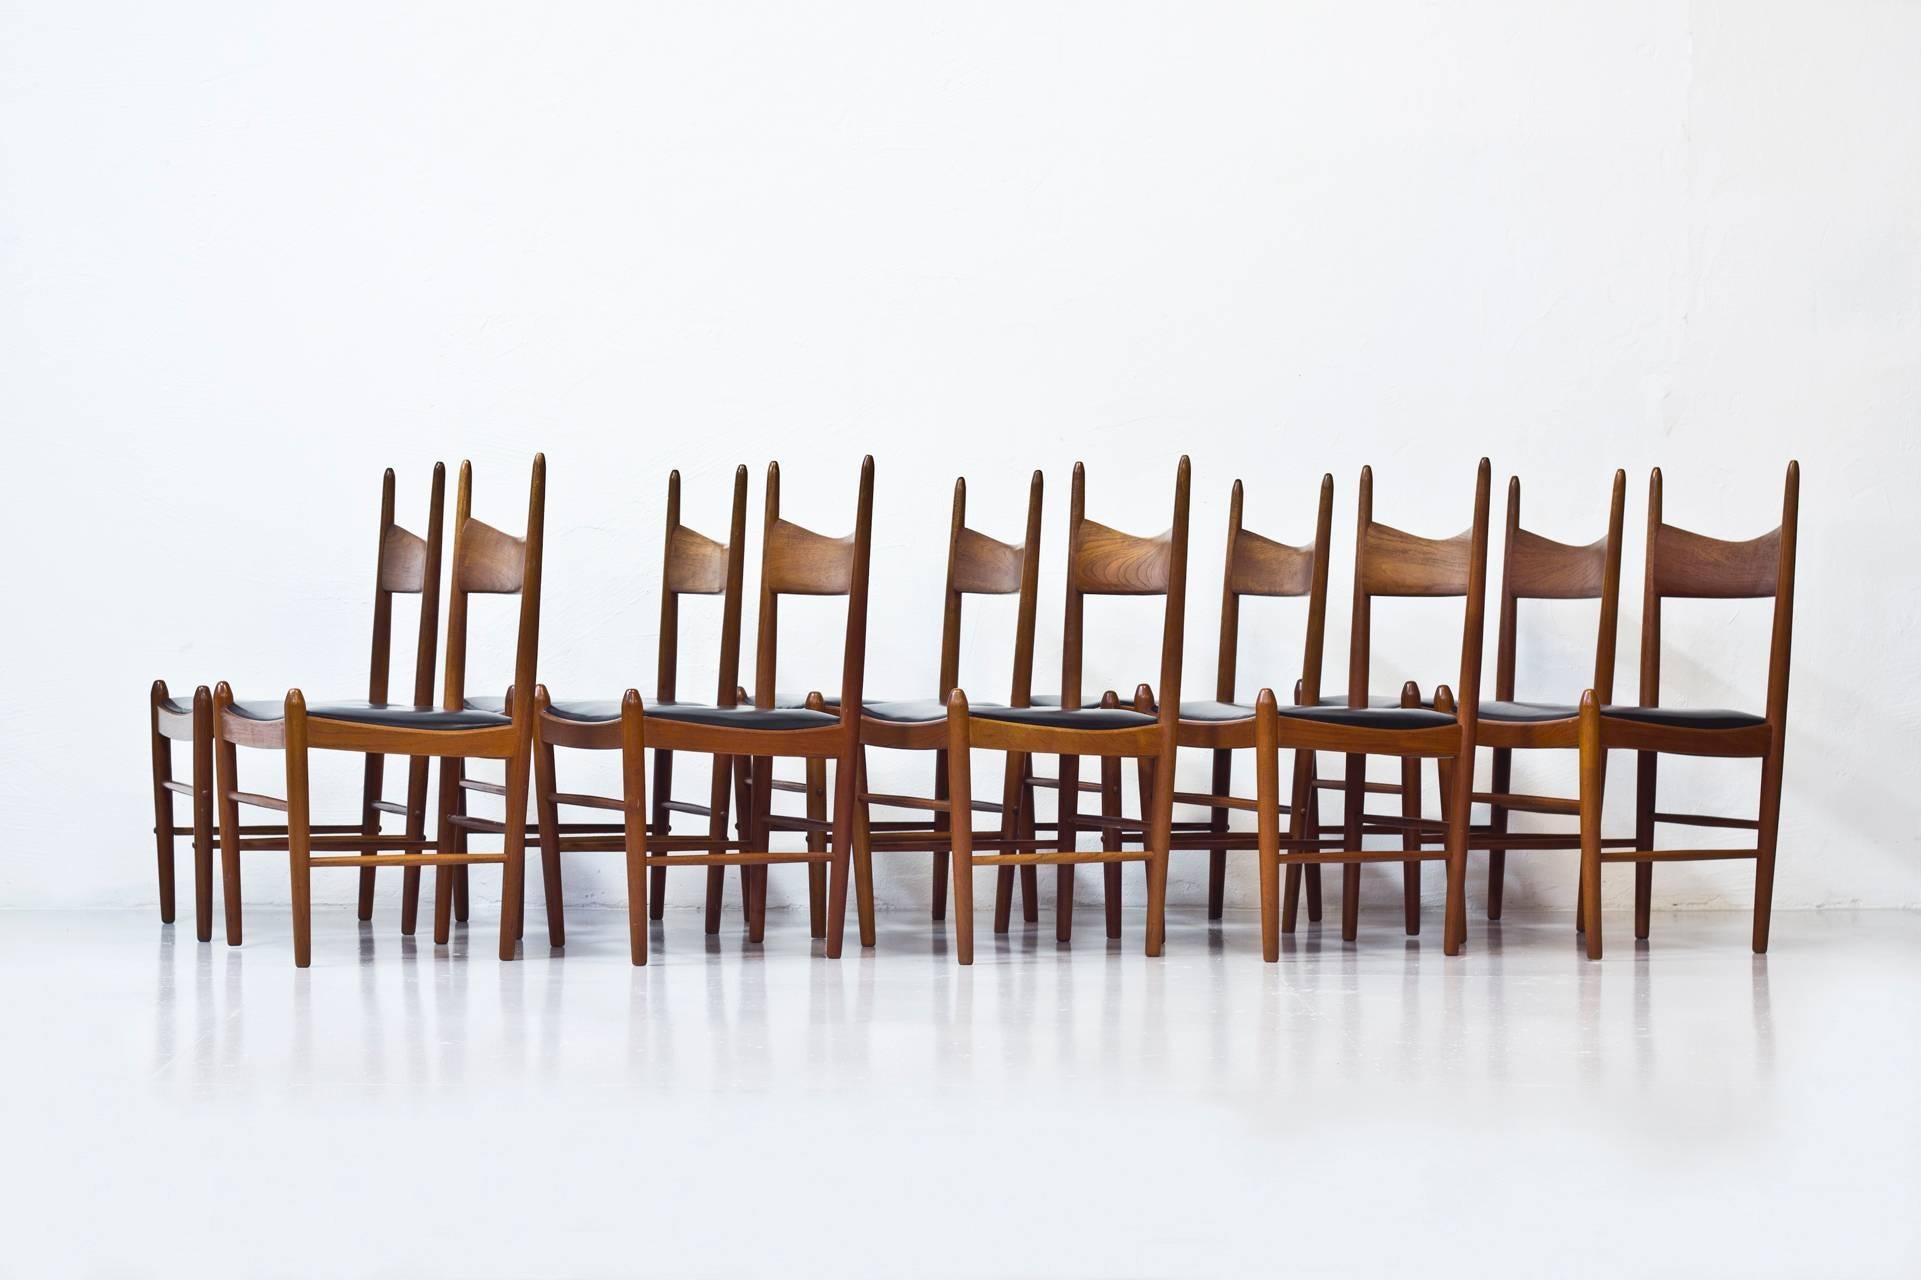 Rare set of ten chairs designed by Illum Wikkelsø. Produced in Denmark by Vestervig Eriksen and Brøderna Tromborg Møbelfabrik during the 1950s. Solid teak frame with black leather seats. Excellent vintage condition, with very few signs of wear and